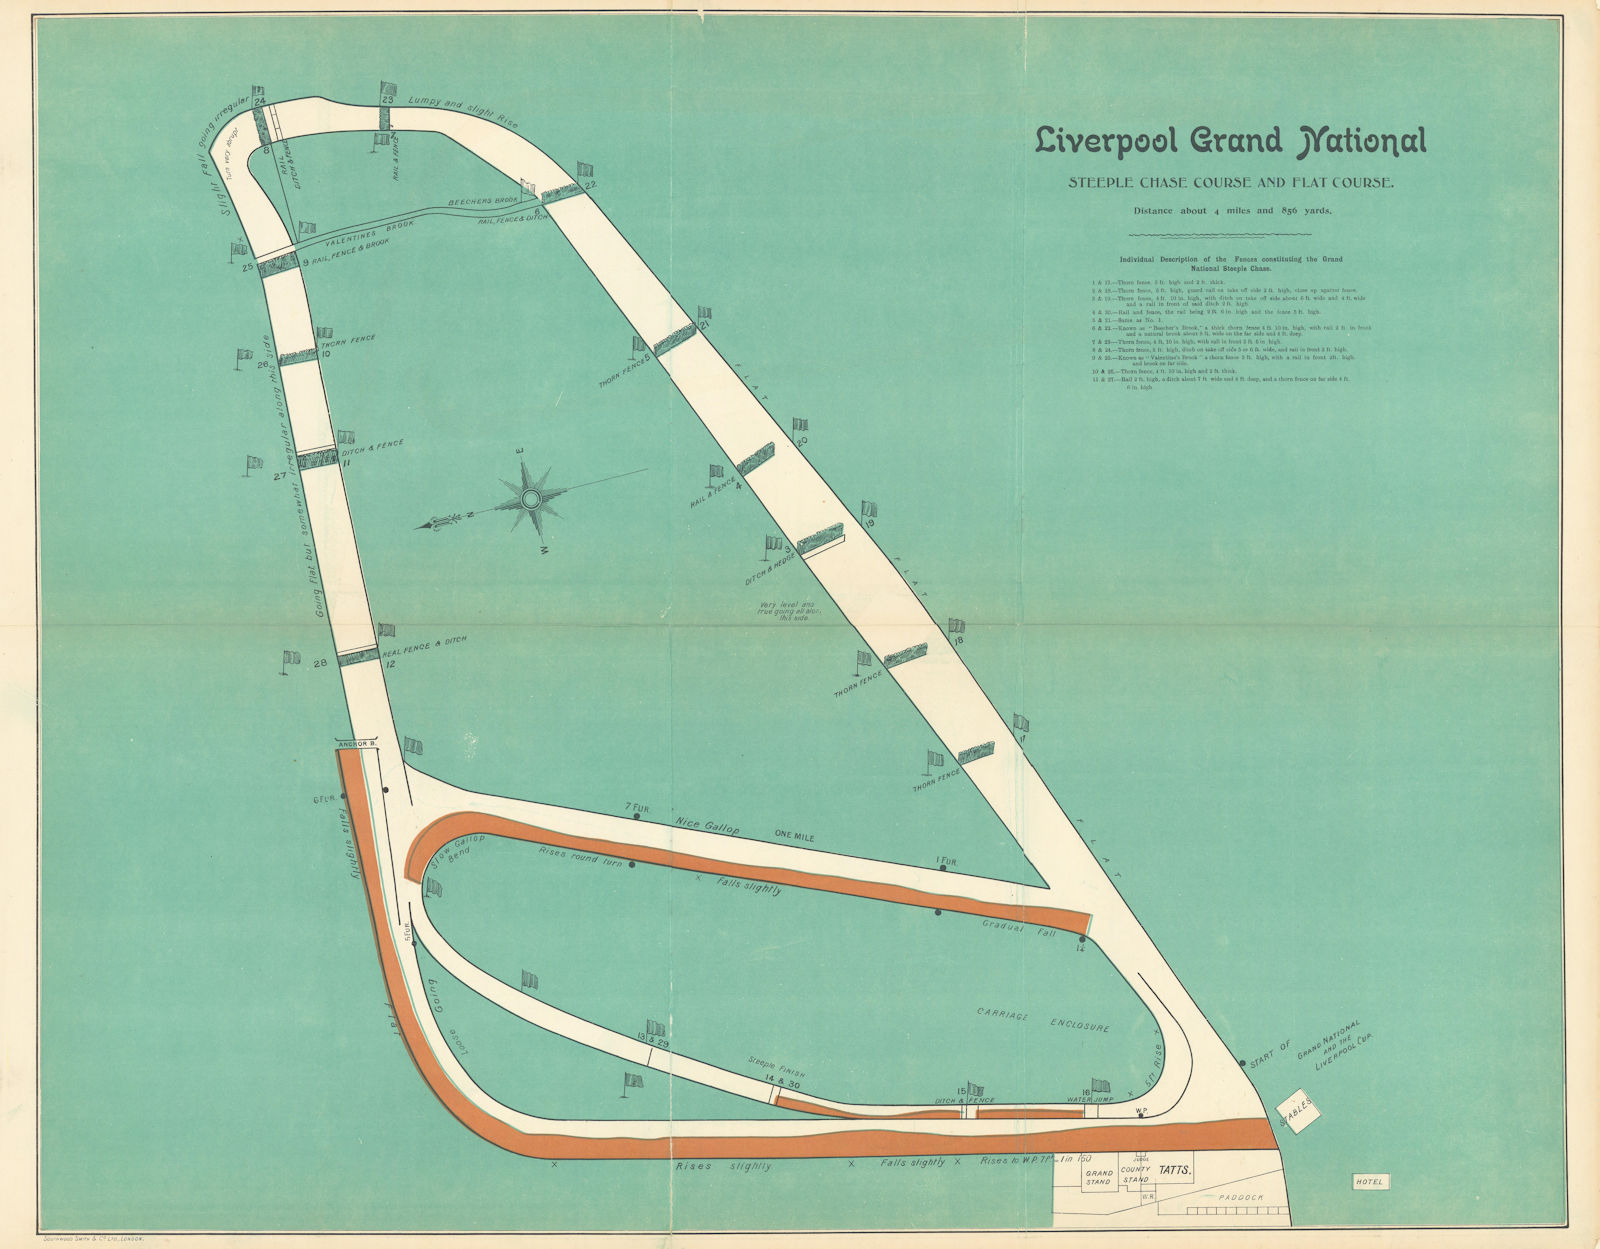 Associate Product Aintree steeplechase & flat racecourse Liverpool Grand National. BAYLES 1903 map